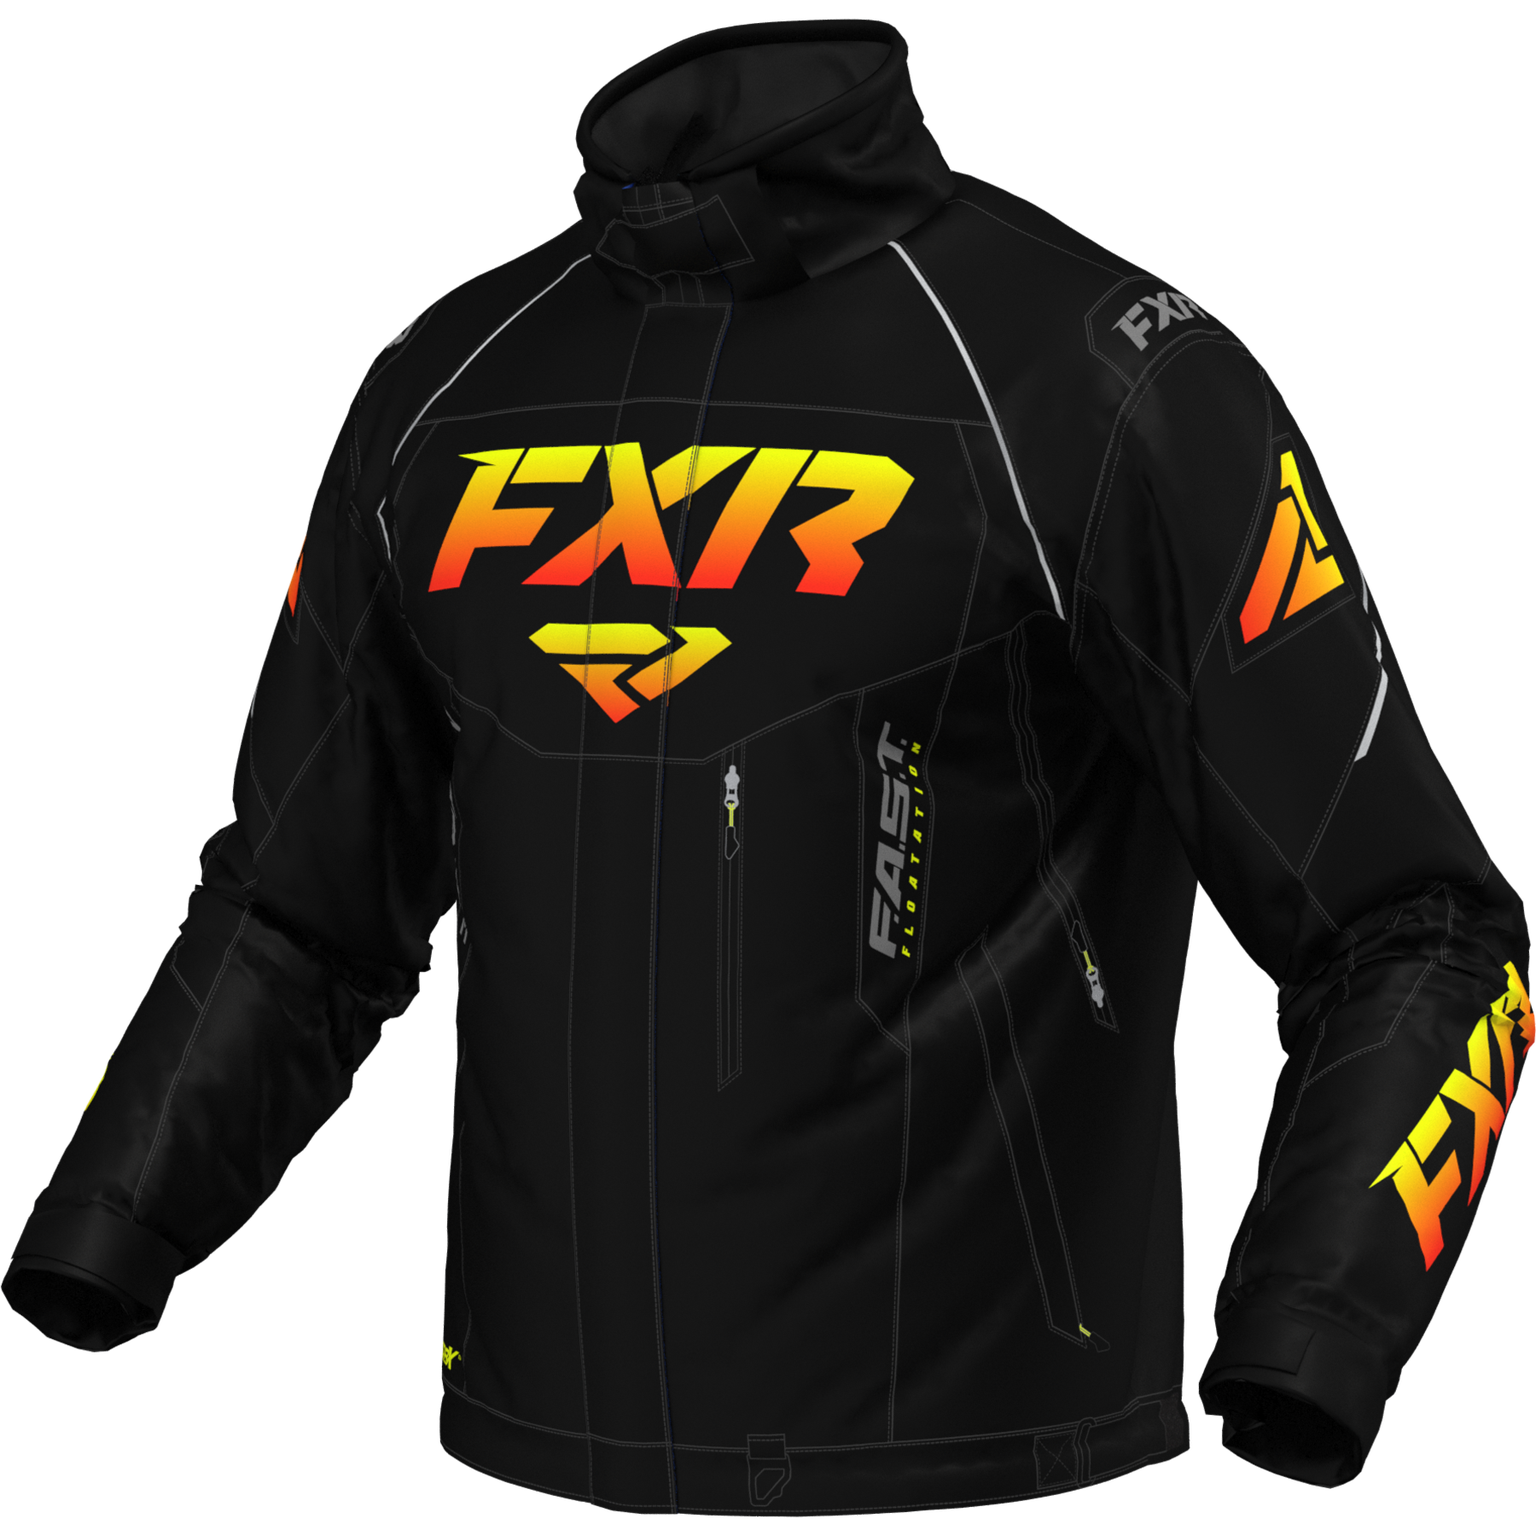 fxr racing insulated jackets for men octane fast